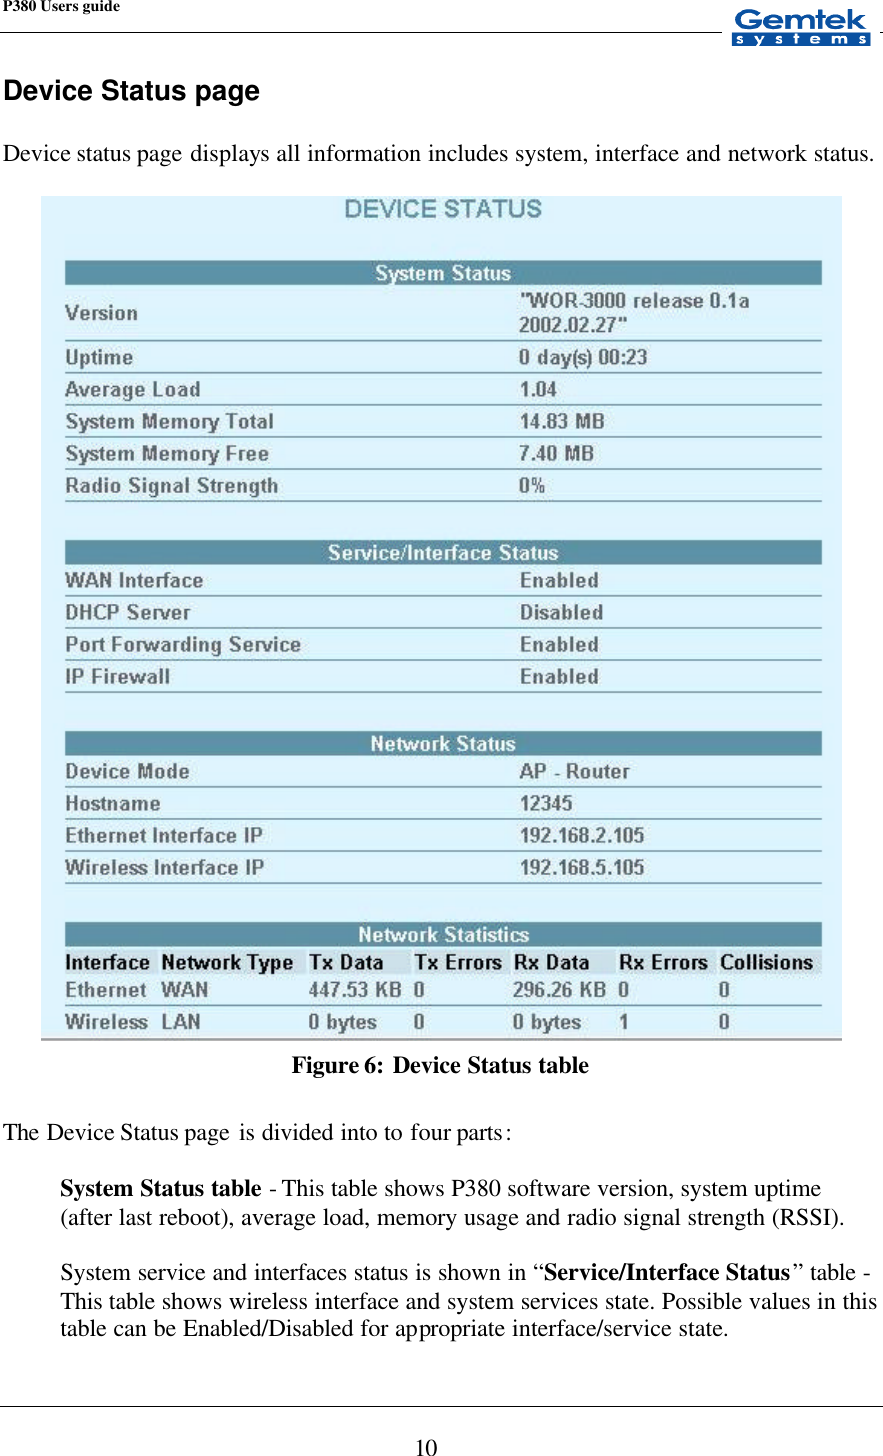 P380 Users guide            10 Device Status page  Device status page displays all information includes system, interface and network status.    Figure 6: Device Status table  The Device Status page  is divided into to four parts:  System Status table - This table shows P380 software version, system uptime (after last reboot), average load, memory usage and radio signal strength (RSSI).   System service and interfaces status is shown in “Service/Interface Status” table - This table shows wireless interface and system services state. Possible values in this table can be Enabled/Disabled for appropriate interface/service state.  